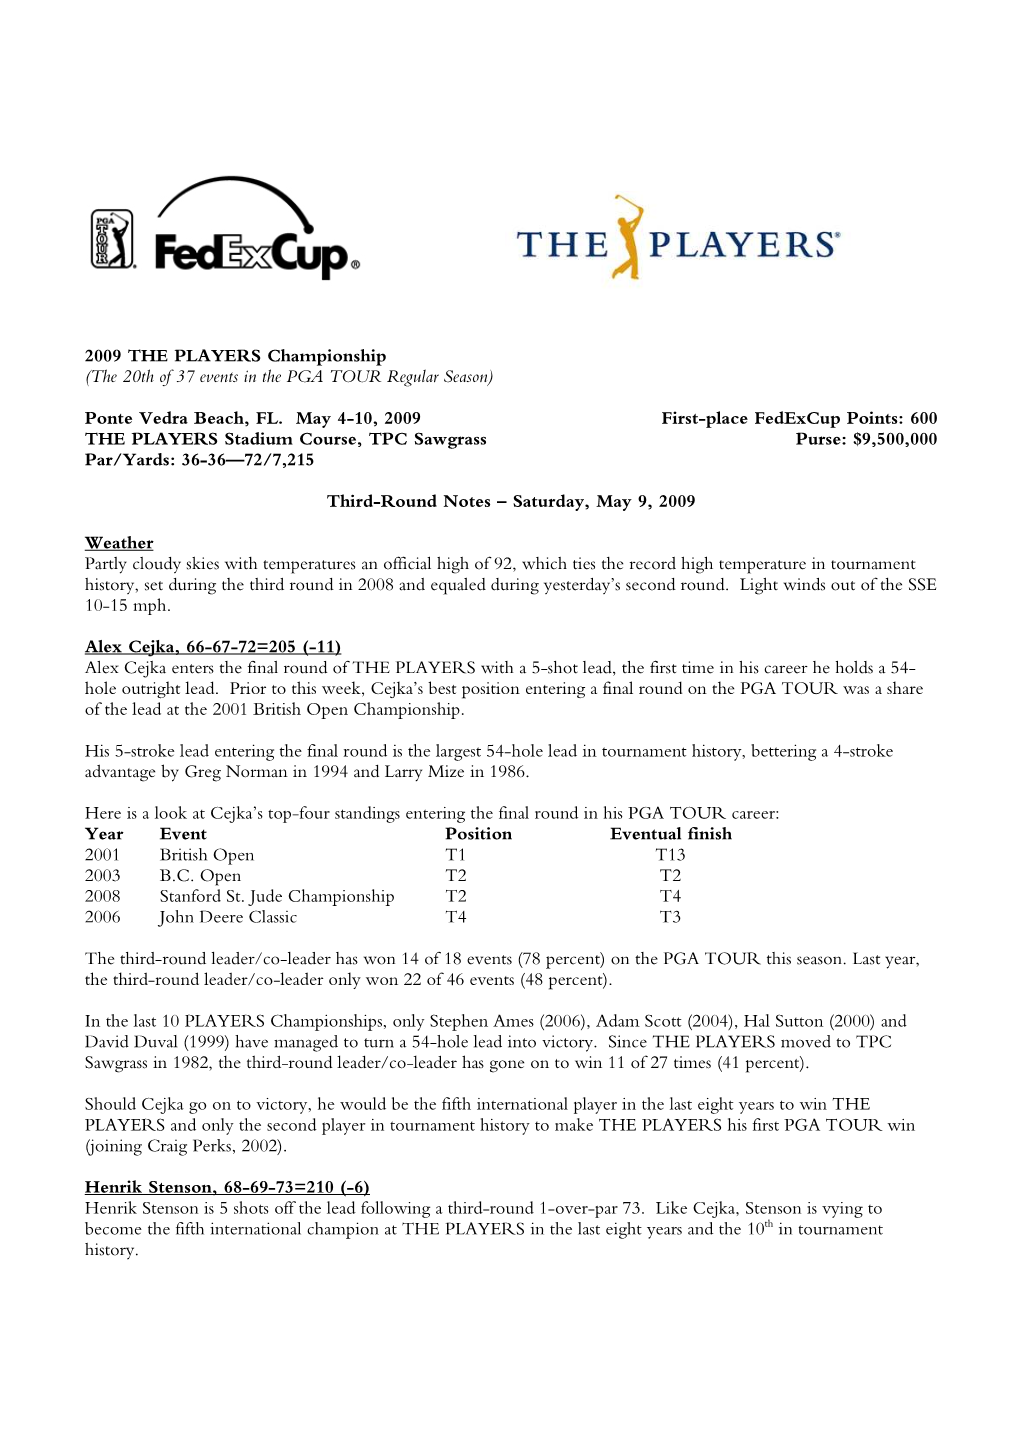 Round 3 FINAL Notes -- 2009 PLAYERS